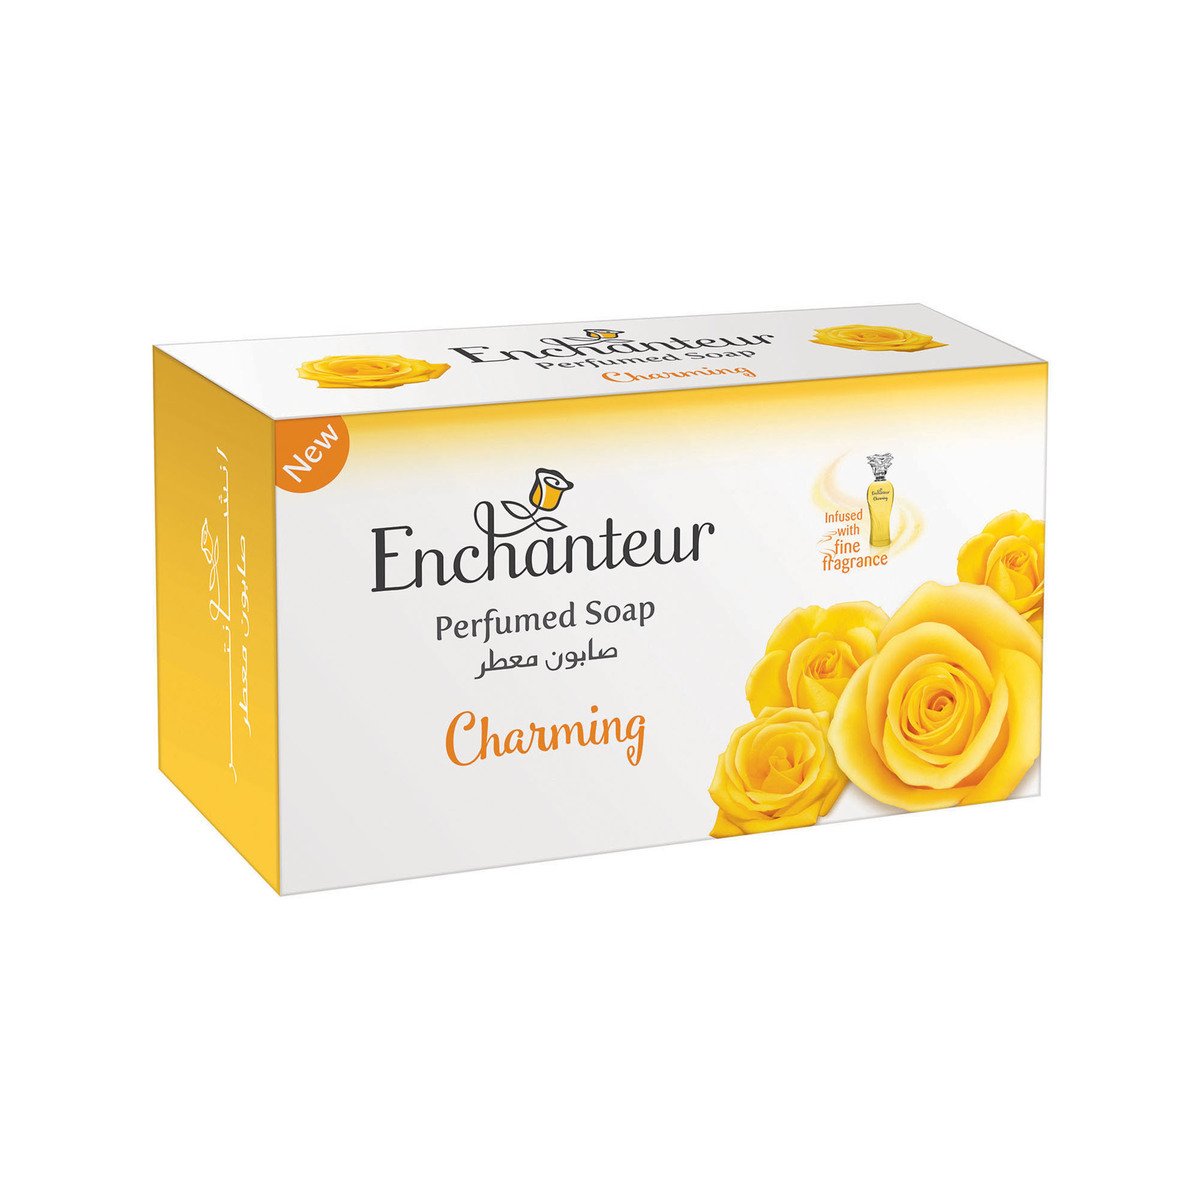 Enchanteur Charming soap with Citrus and Cedarwood Extracts 125g